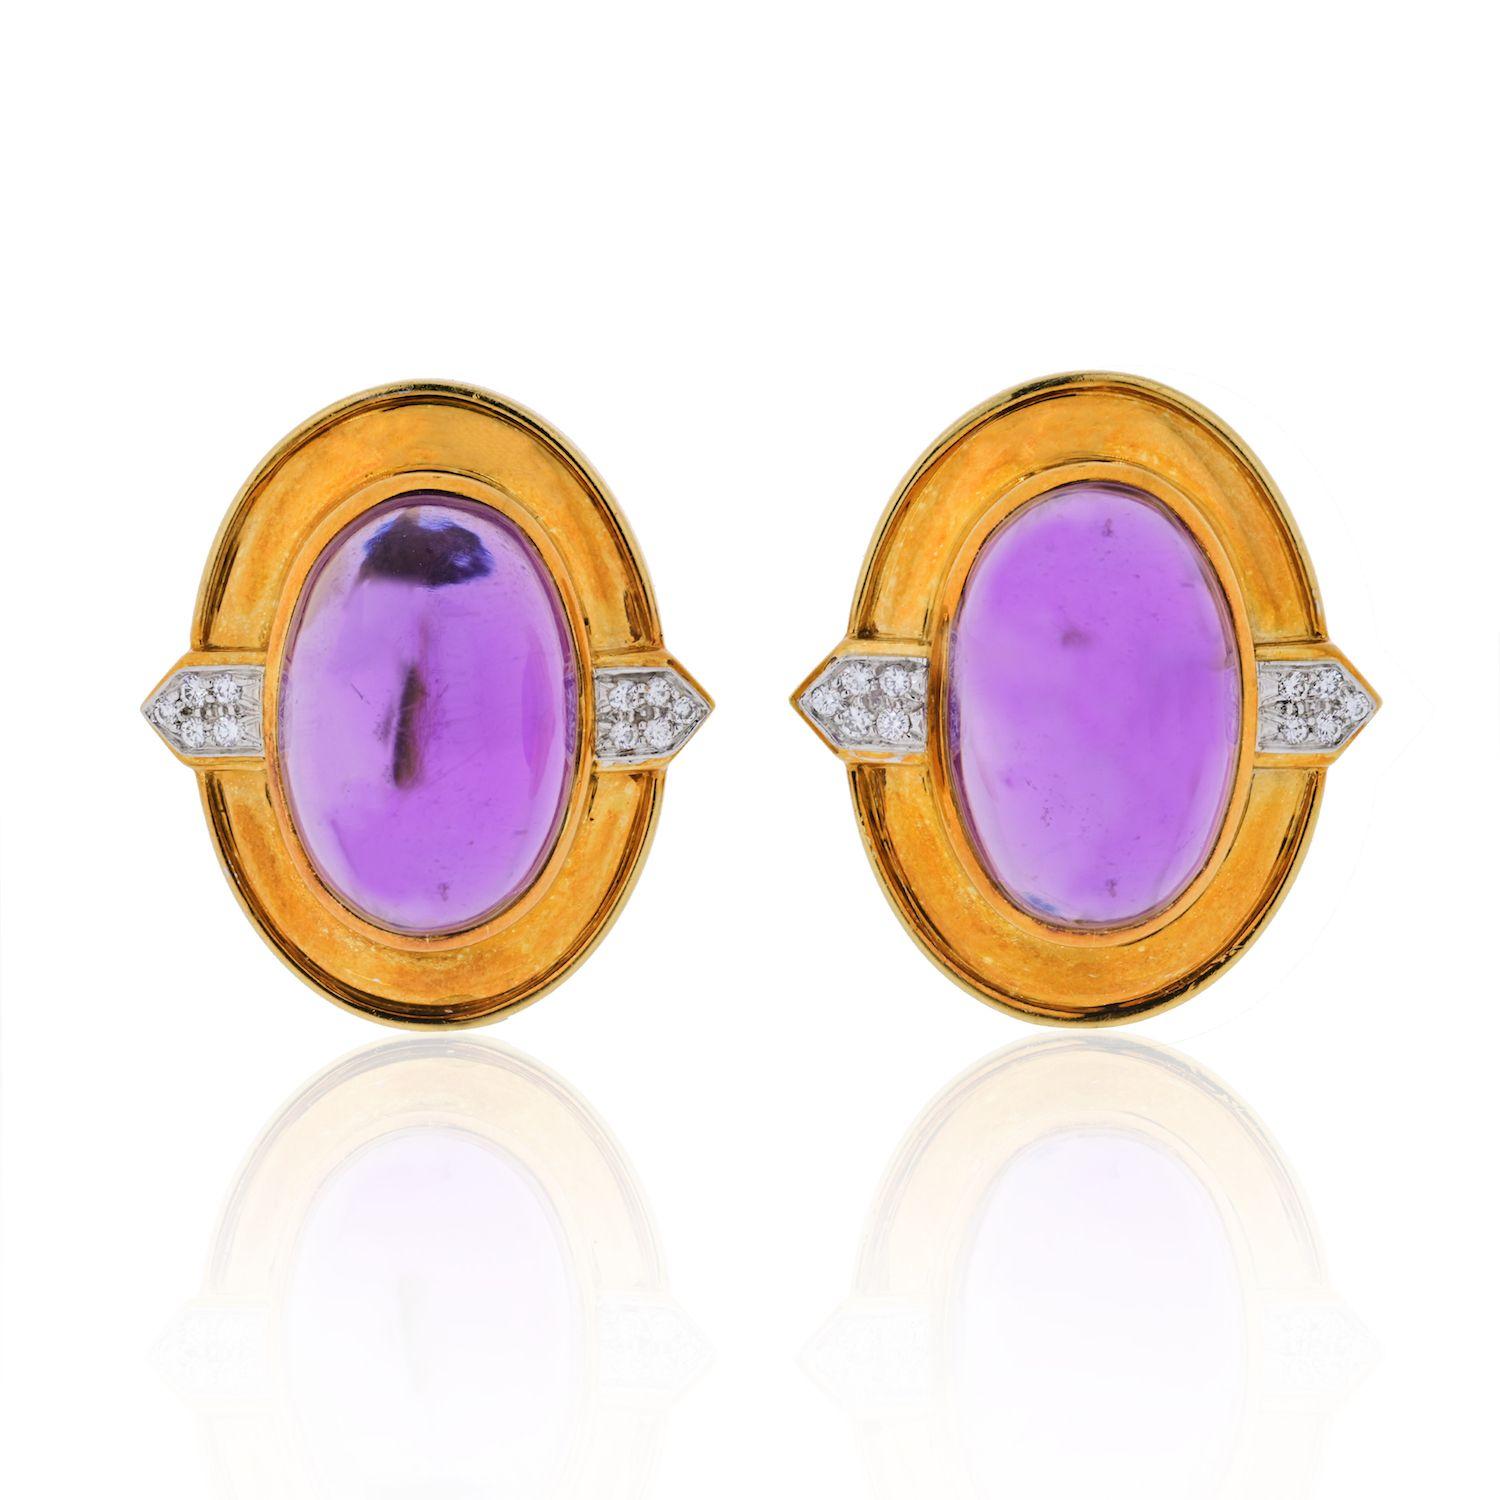 Vintage David Webb earrings crafted in 18K yellow gold set with oval cut cabochon amethysts, accented by pave set diamonds. 
Length: 30mm 
Width: 21mm 
There are posts therefore an earring can be worn on pierced ears. Posts can be removed and be